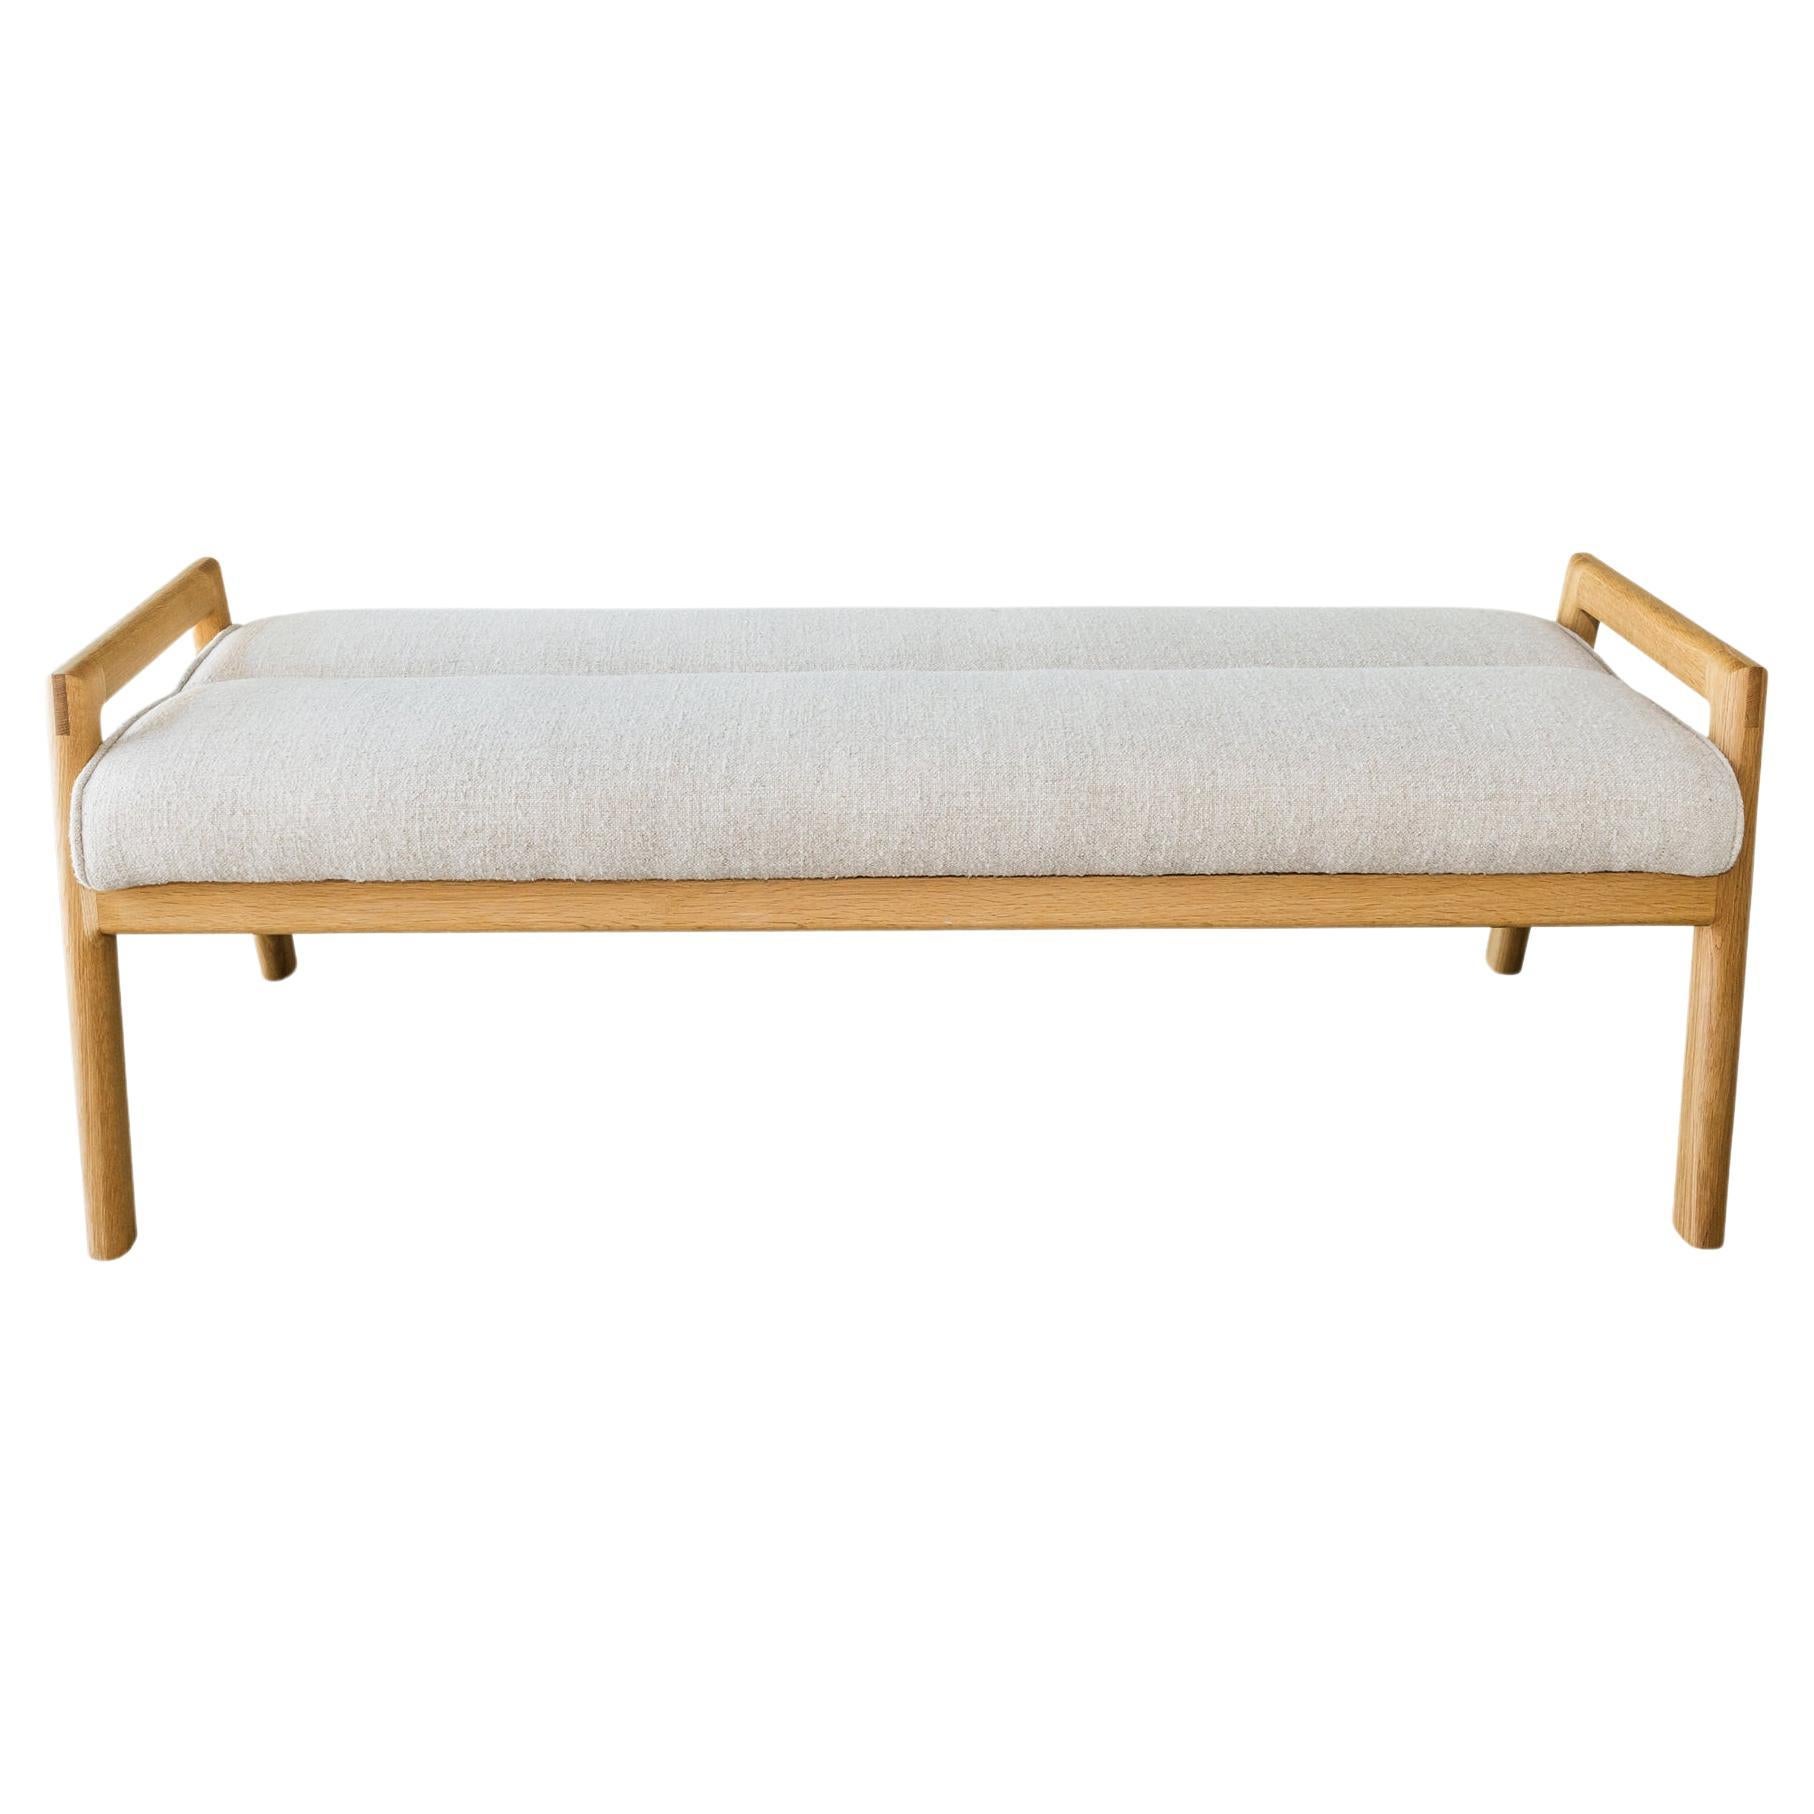 White Oak framed MORESBY Bench with custom upholstered seat For Sale